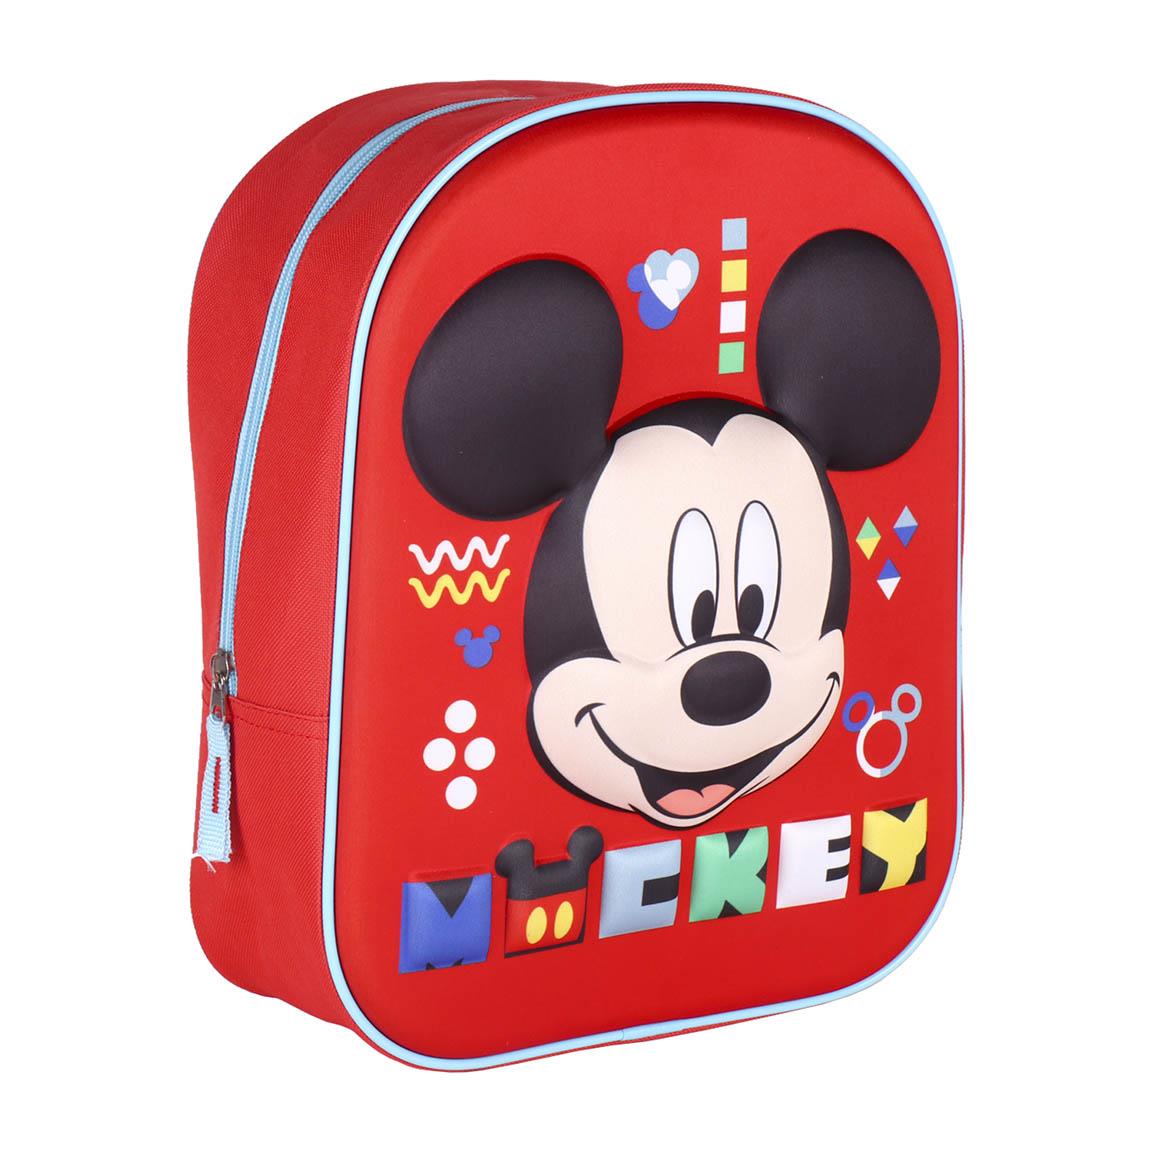 KIDS BACKPACK 3D MICKEY